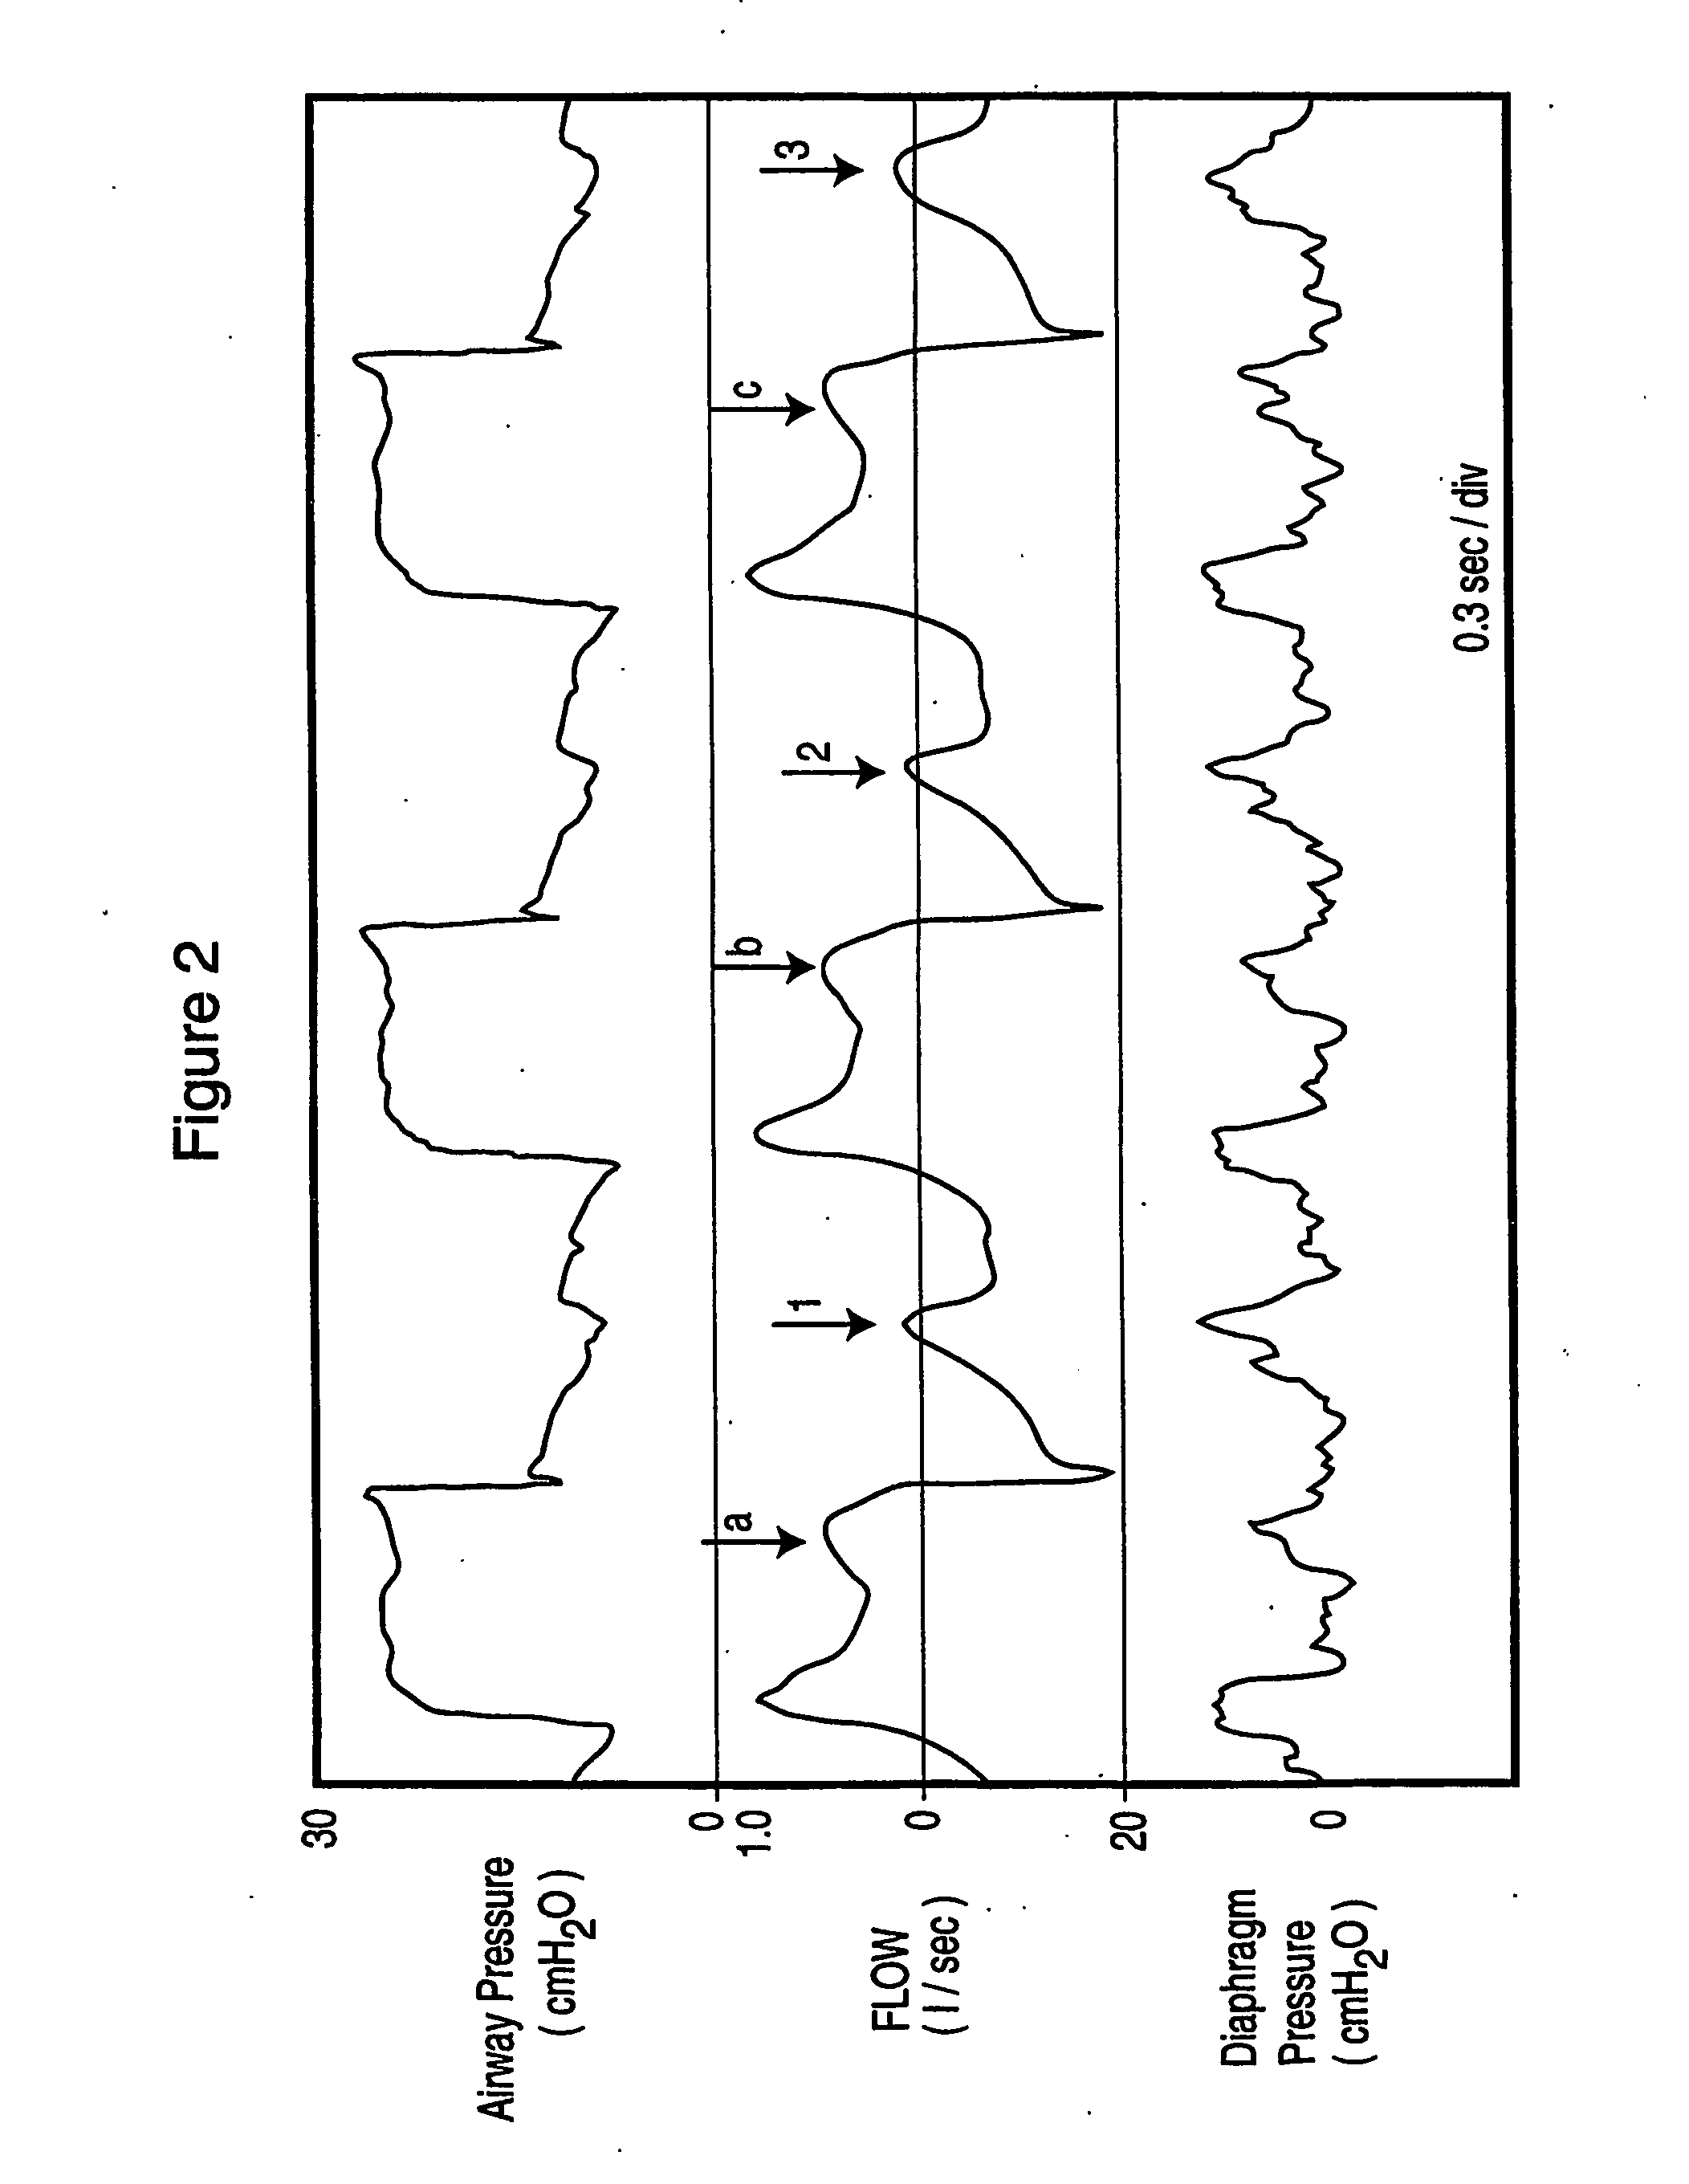 Method and device for monitoring and improving patient-ventilator interaction